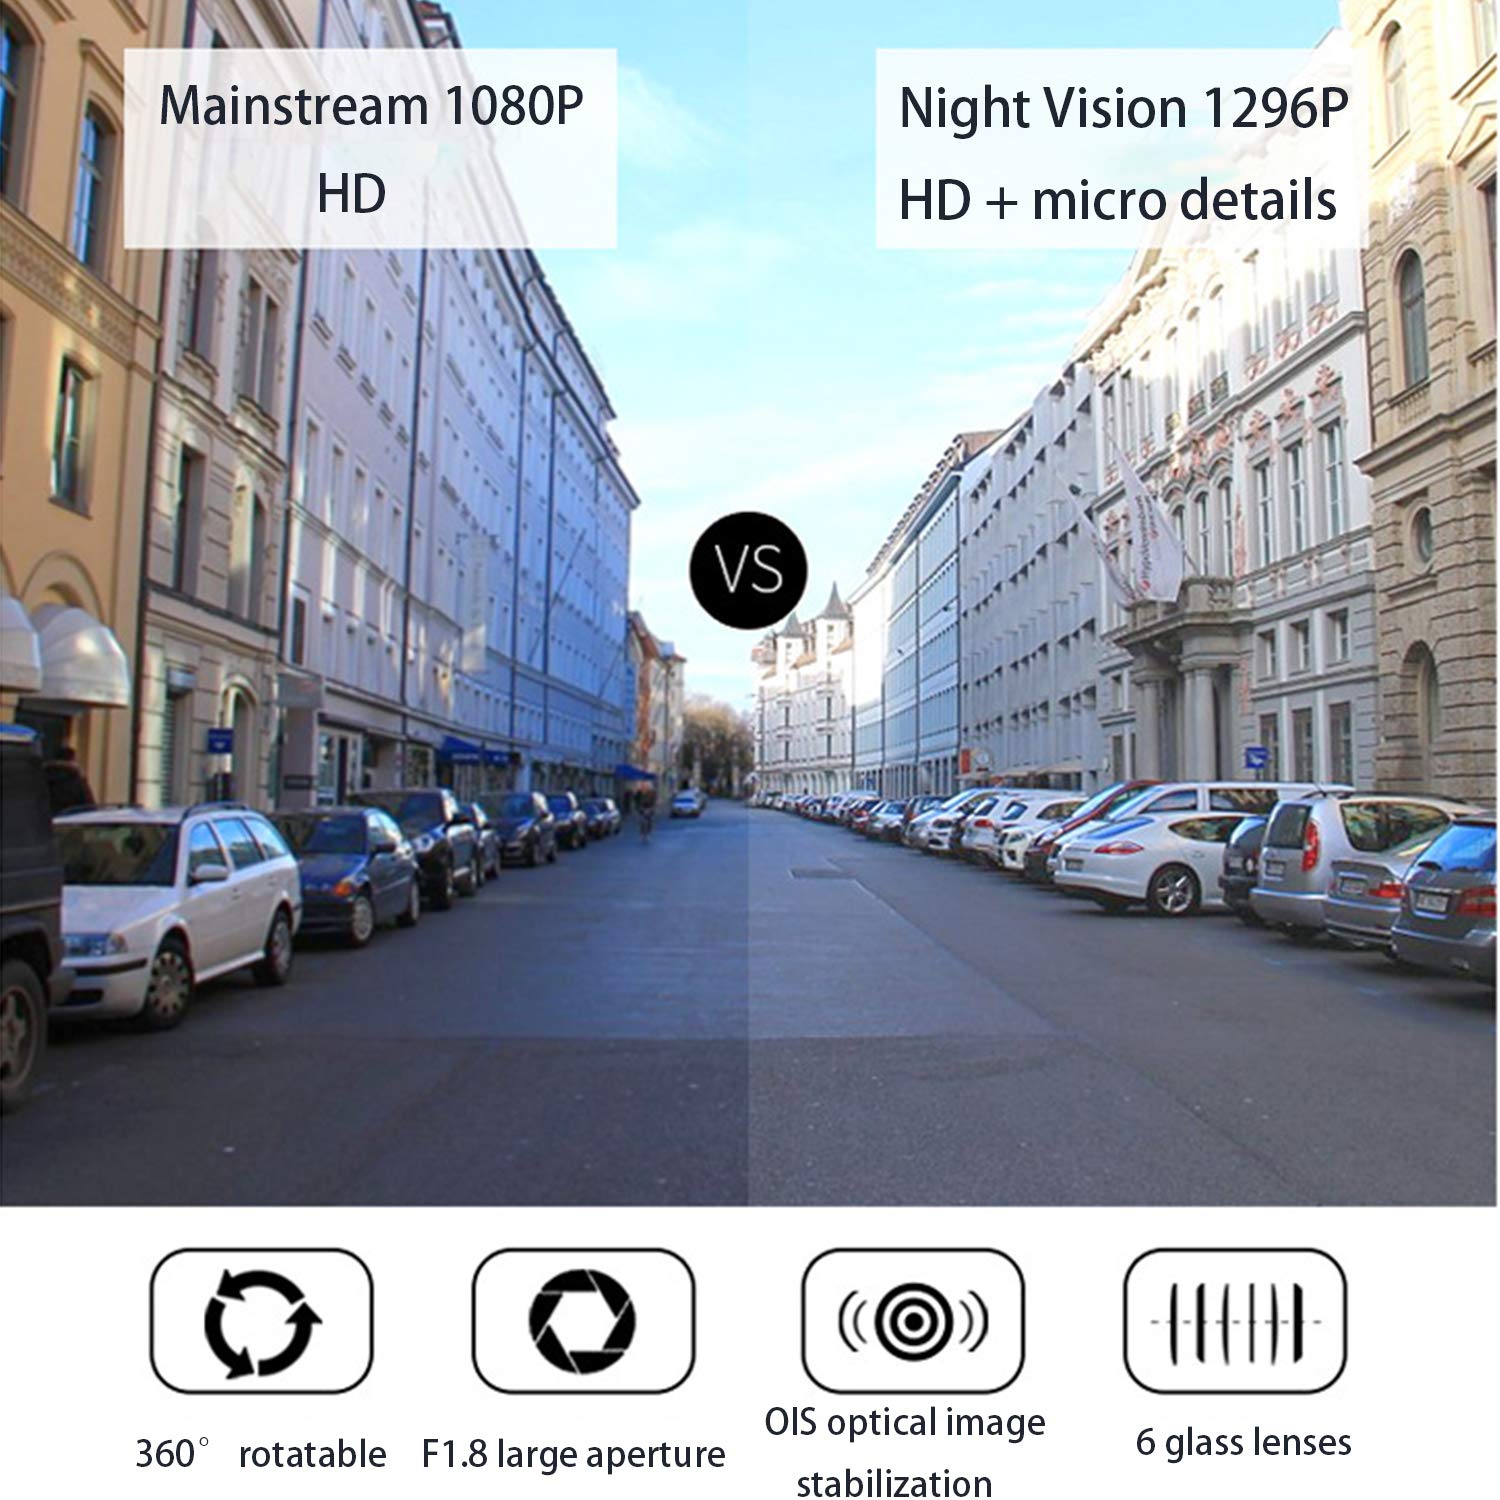 Hidden-HD-Starlight-Night-Vision-WiFi-Sprint-Camera-Front-and-Rear-with-Double-Lens-360-deg-Rotation-1451760